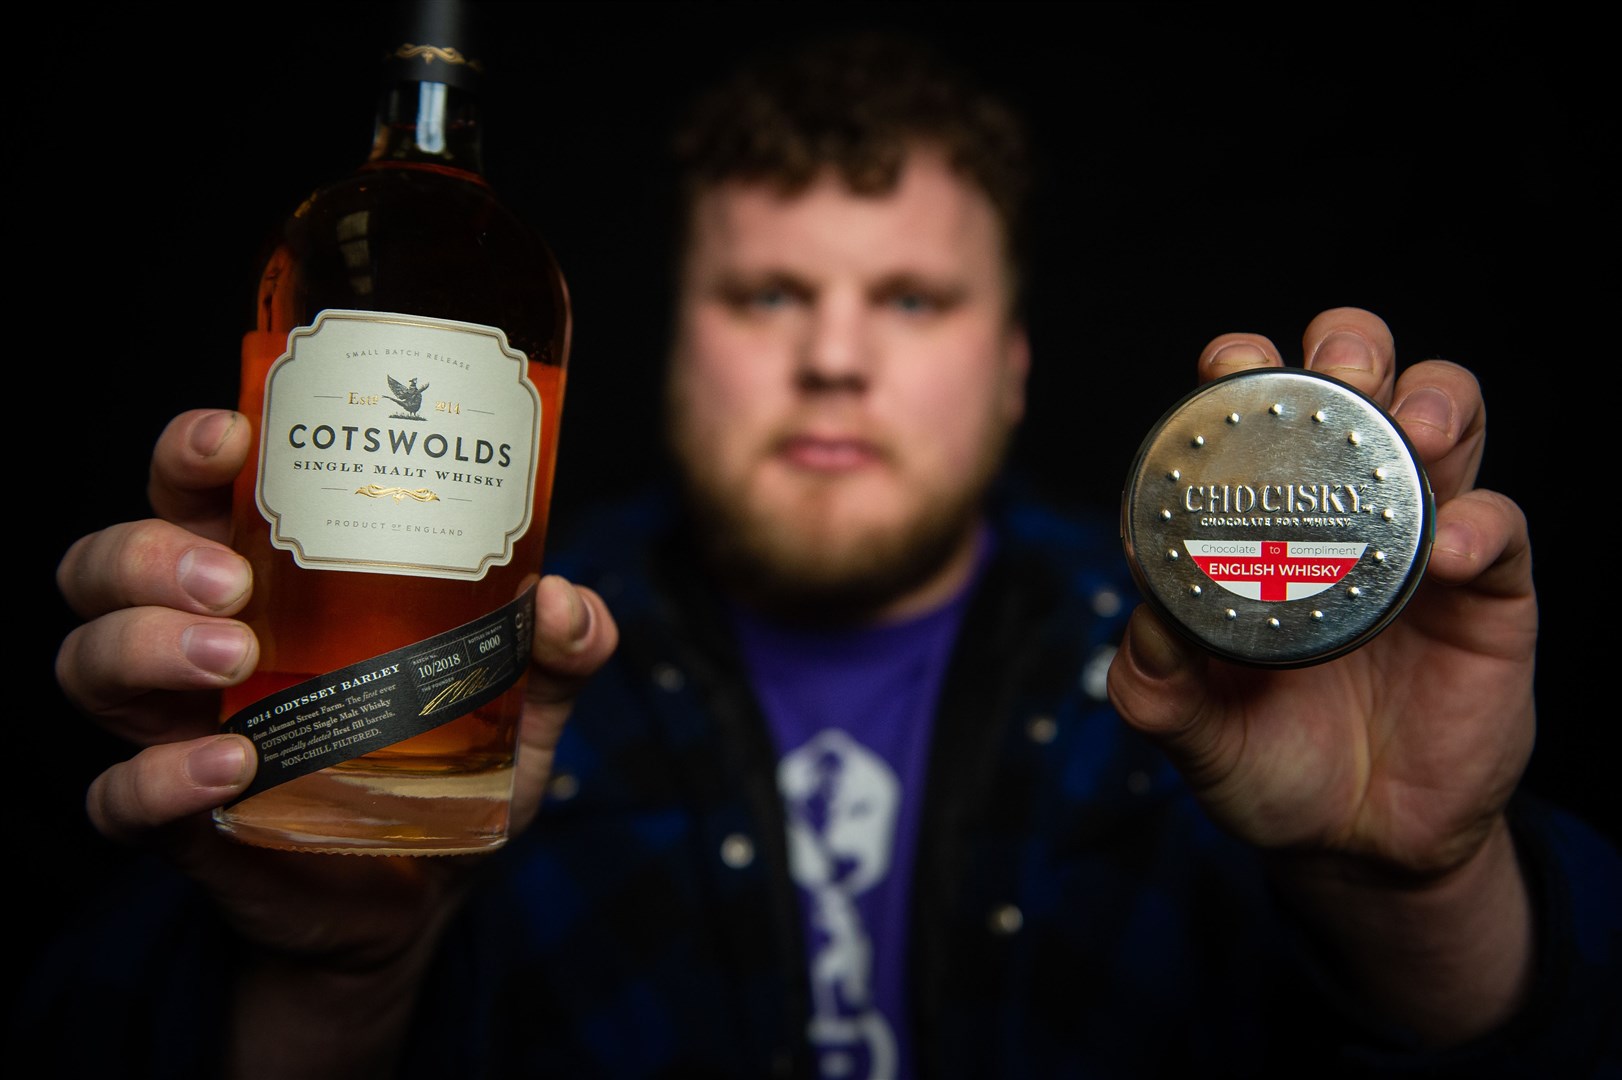 Tom Stoltman with the new line of whisky products aimed at our friends across the border.